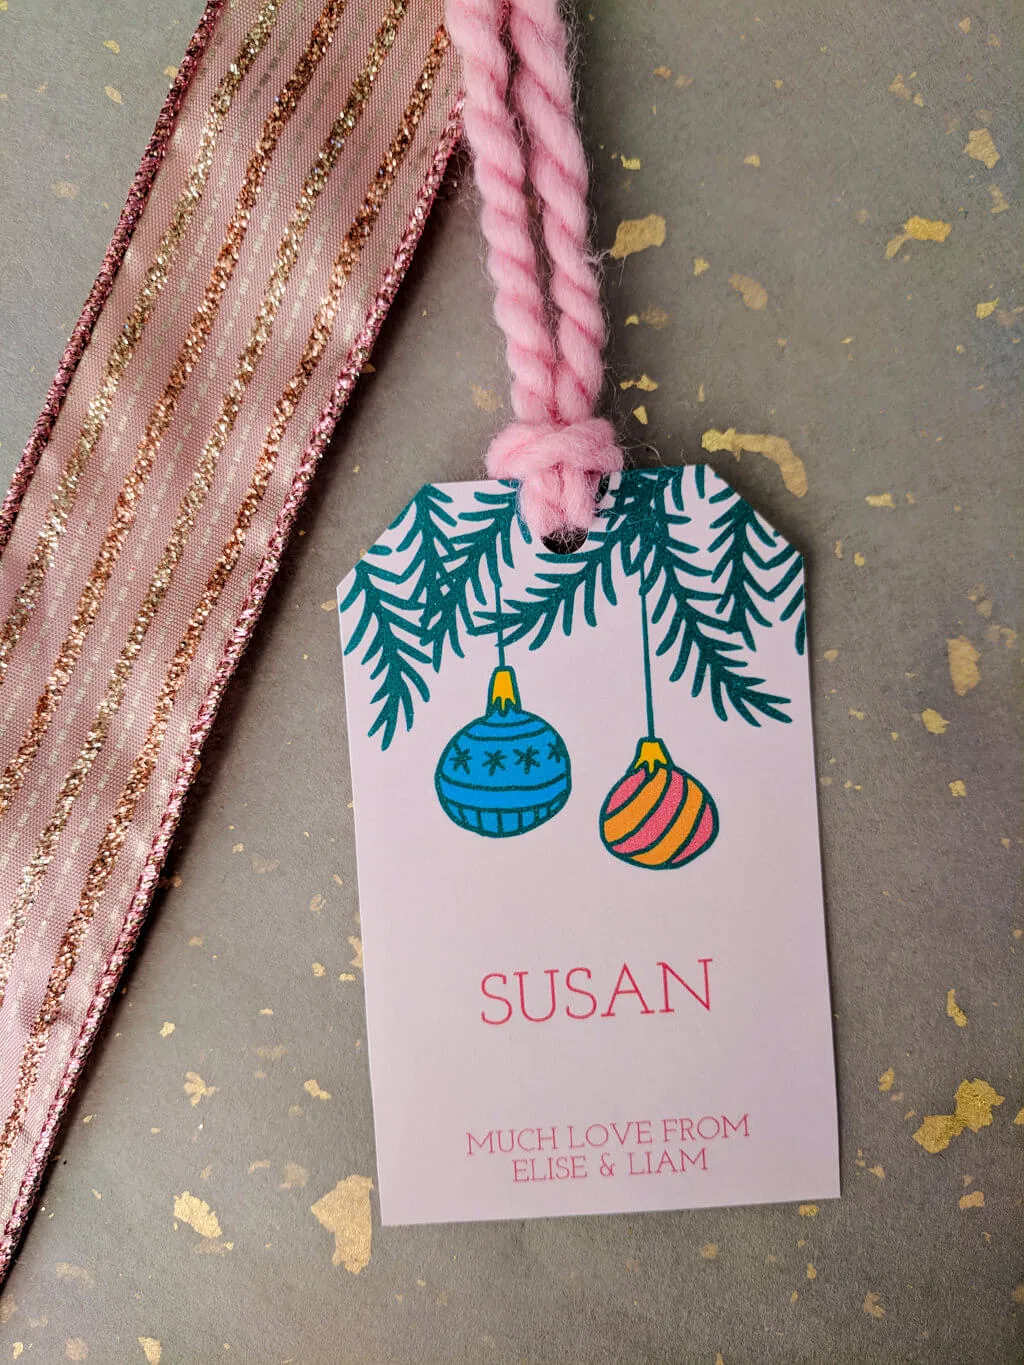 Custom Paper Tags - Design your own Paper Tags for Free!